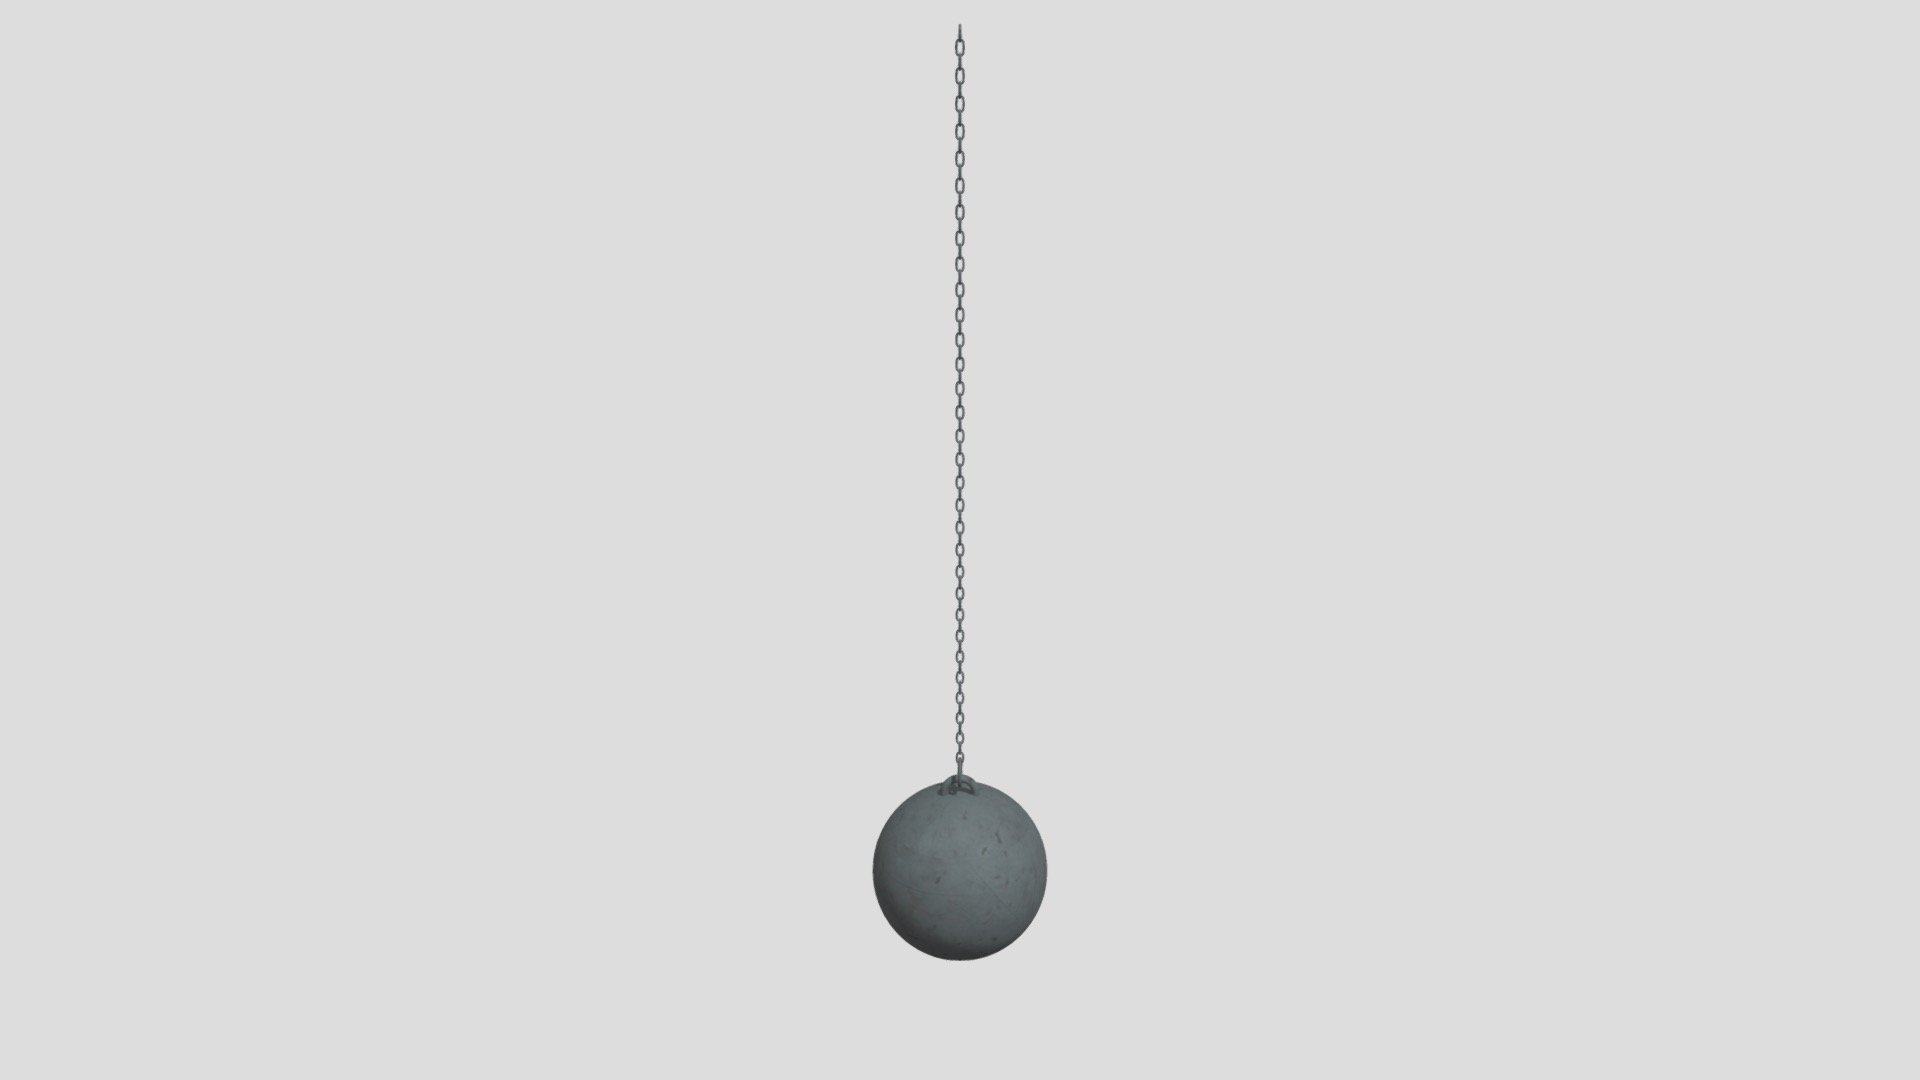 Subdivision Level: 0

Non-Mirrored.

Textures: 1024 x 1024 and 2048 x 2048, Multiple grey colors on texture.

Materials: 1 - WreckingBall

Rigged

Formats: .stl .obj .fbx .dae

Origin located on middle-center

Polygons: 114752

Vertices: 57402

I hope you enjoy the model! - Wrecking Ball - Buy Royalty Free 3D model by Ed+ (@EDplus) 3d model